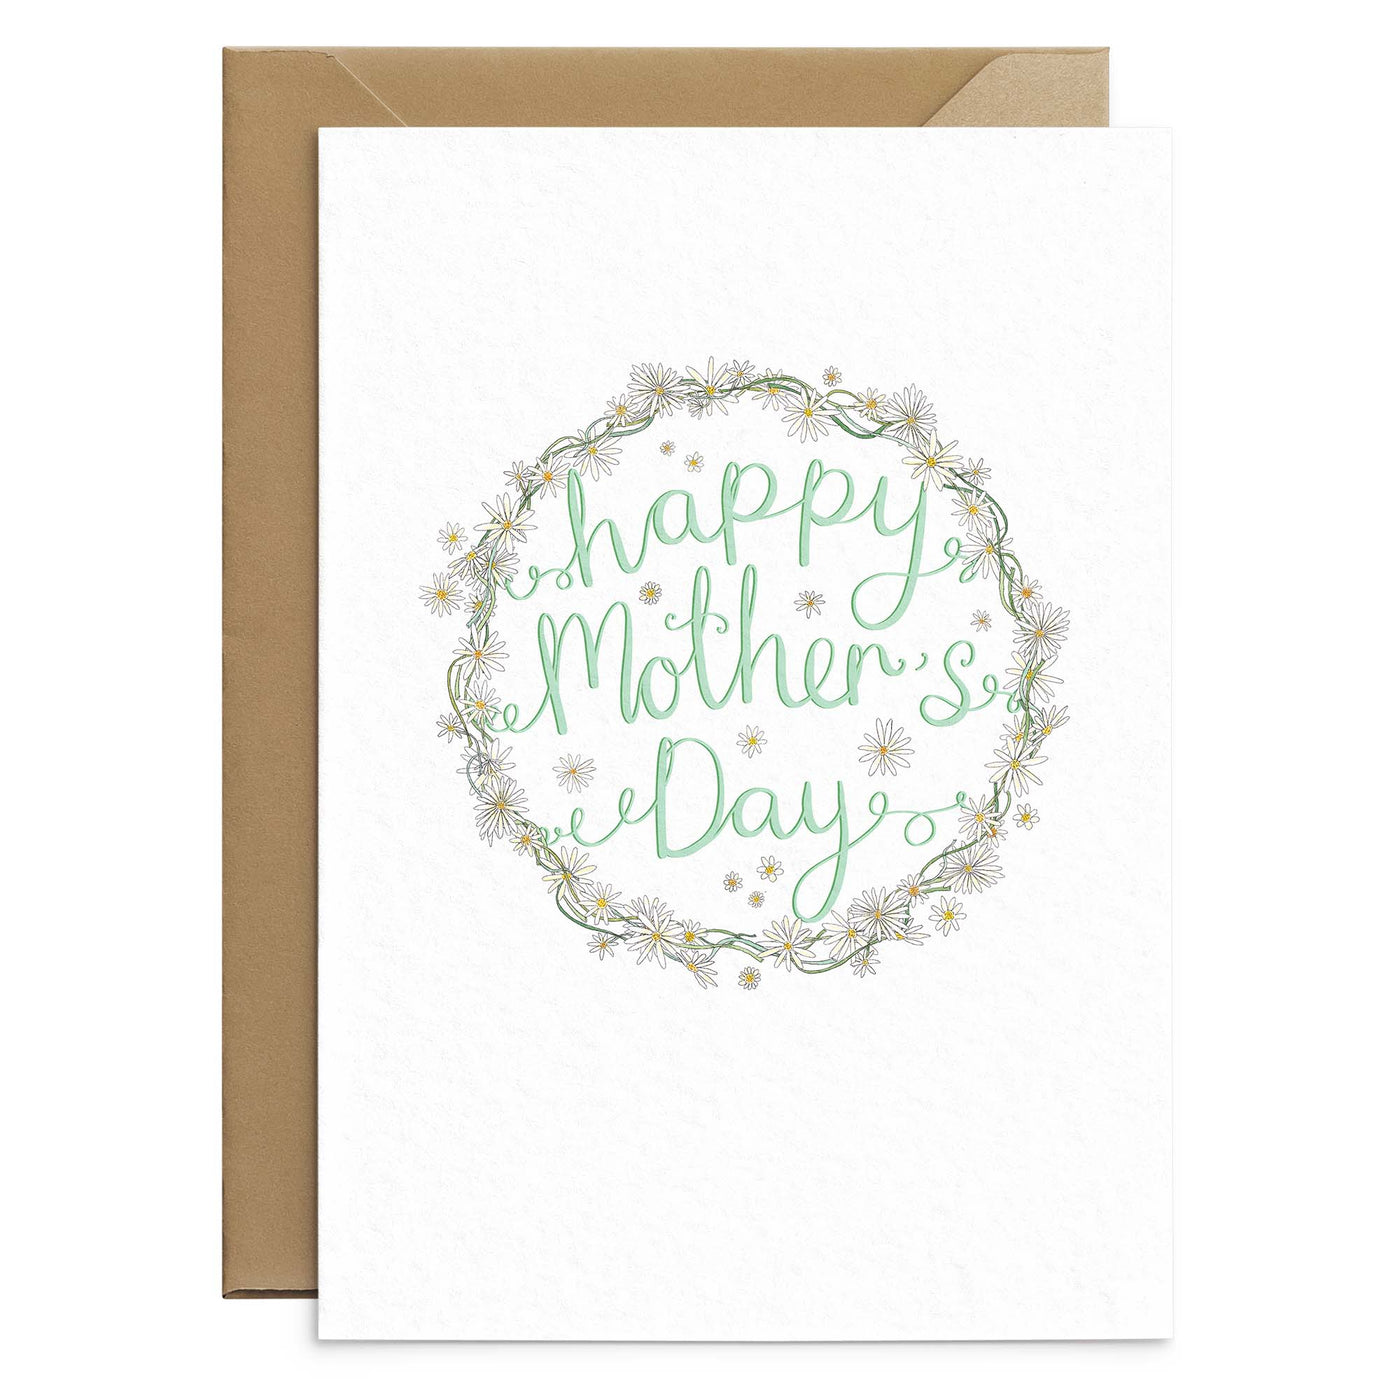 A cute daisy themed greetings card with a unique illustration or a daisy chain wreath and dotted daisy heads around mint green scripted text. text reads 'happy Mother's Day'. the card has a white background and behind it you can the the edge of a brown Kraft envelope. Greetings Card by Poppins and co.